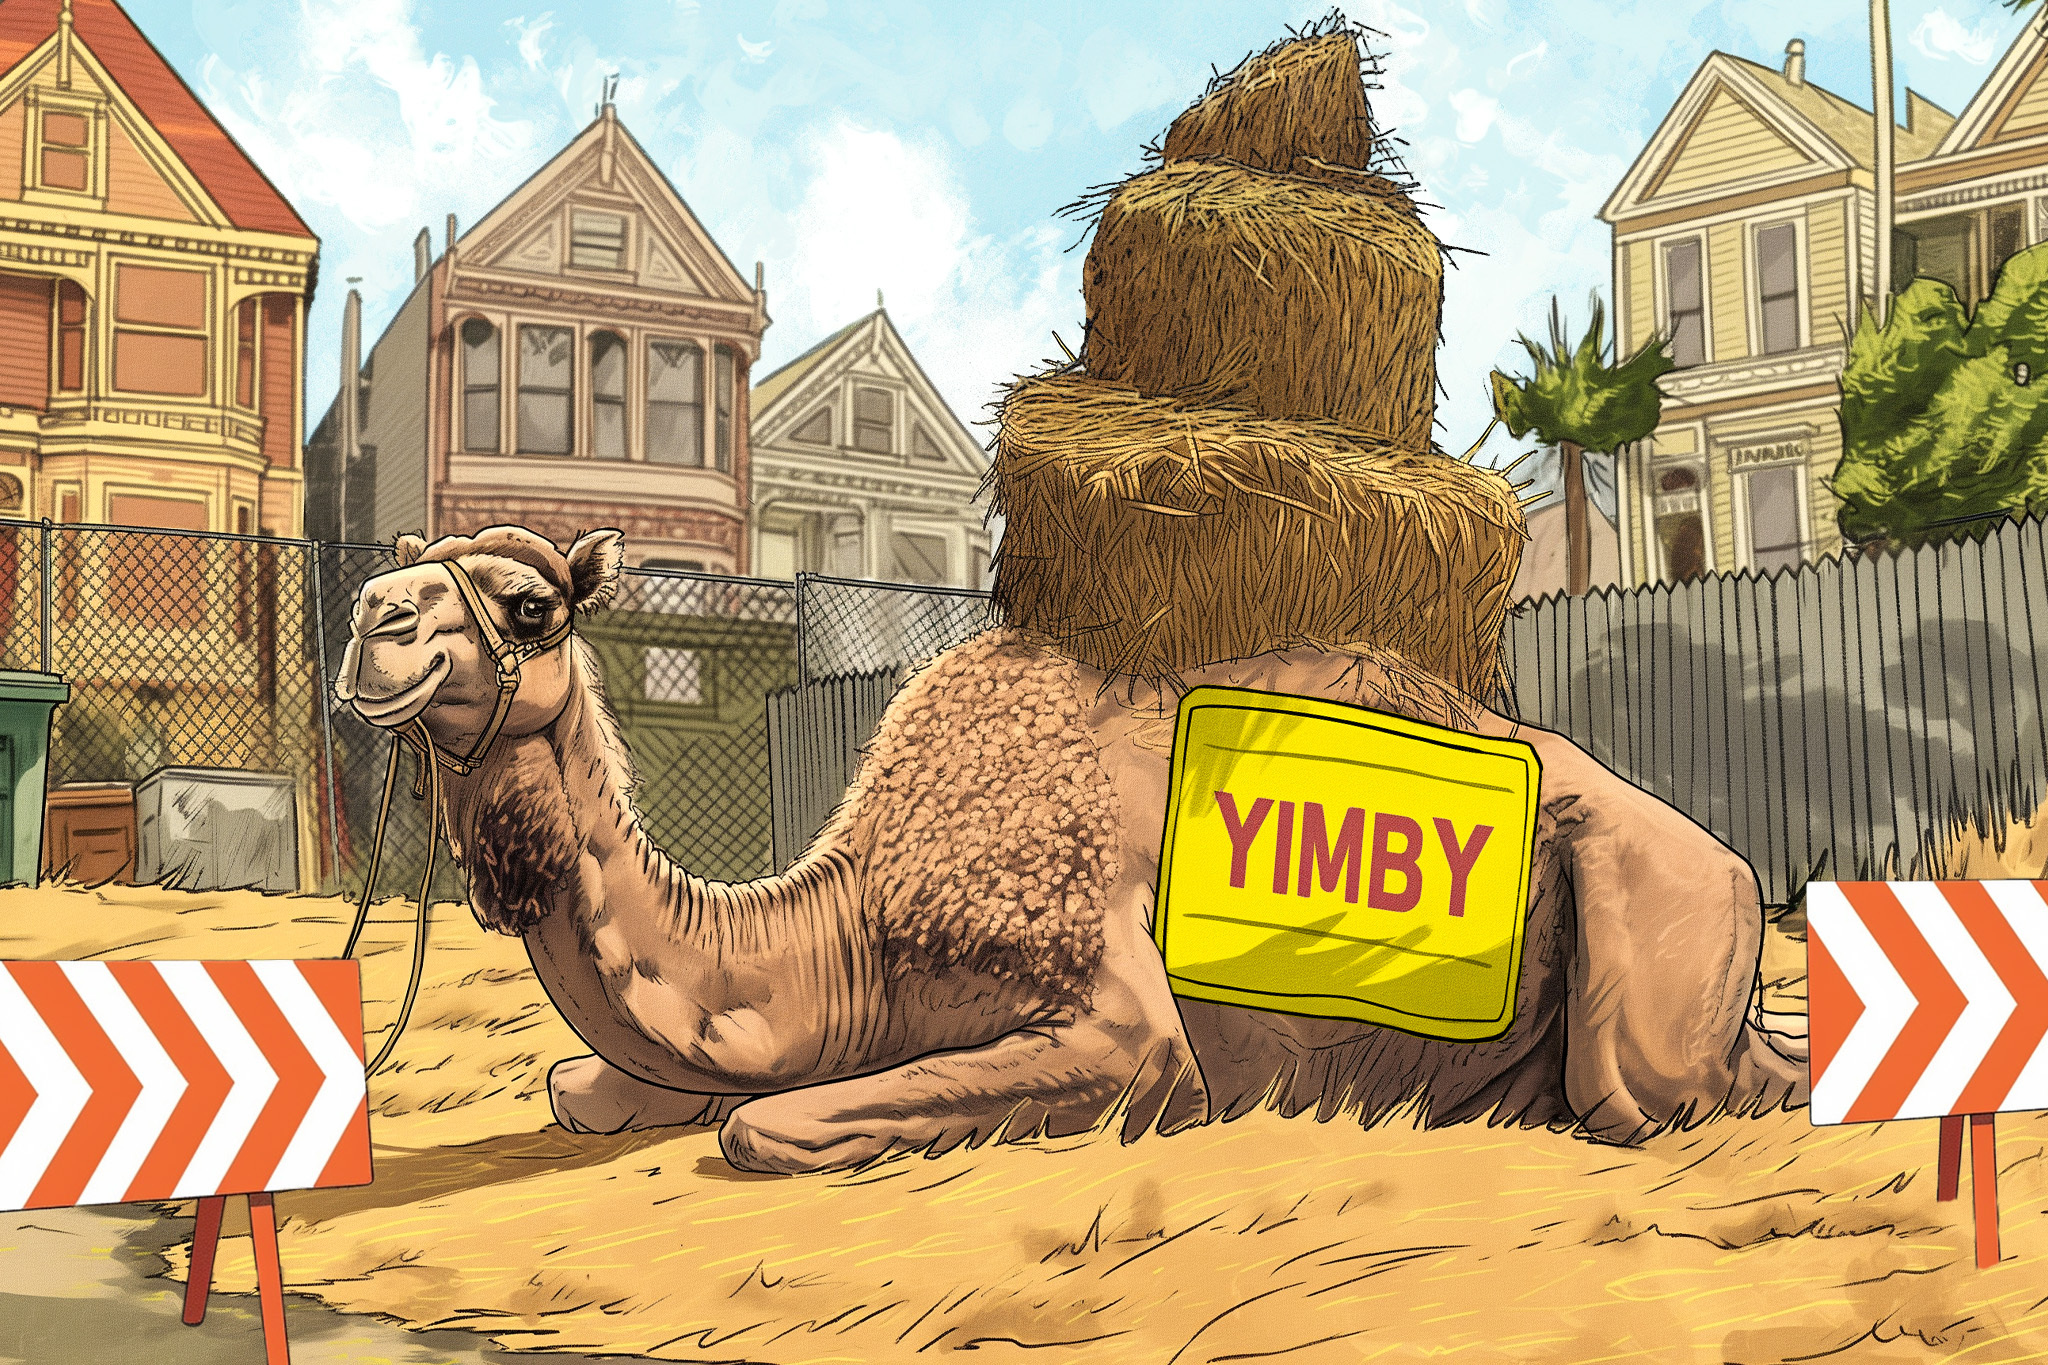 A camel with a "YIMBY" sign lies in a sandy area by Victorian houses.